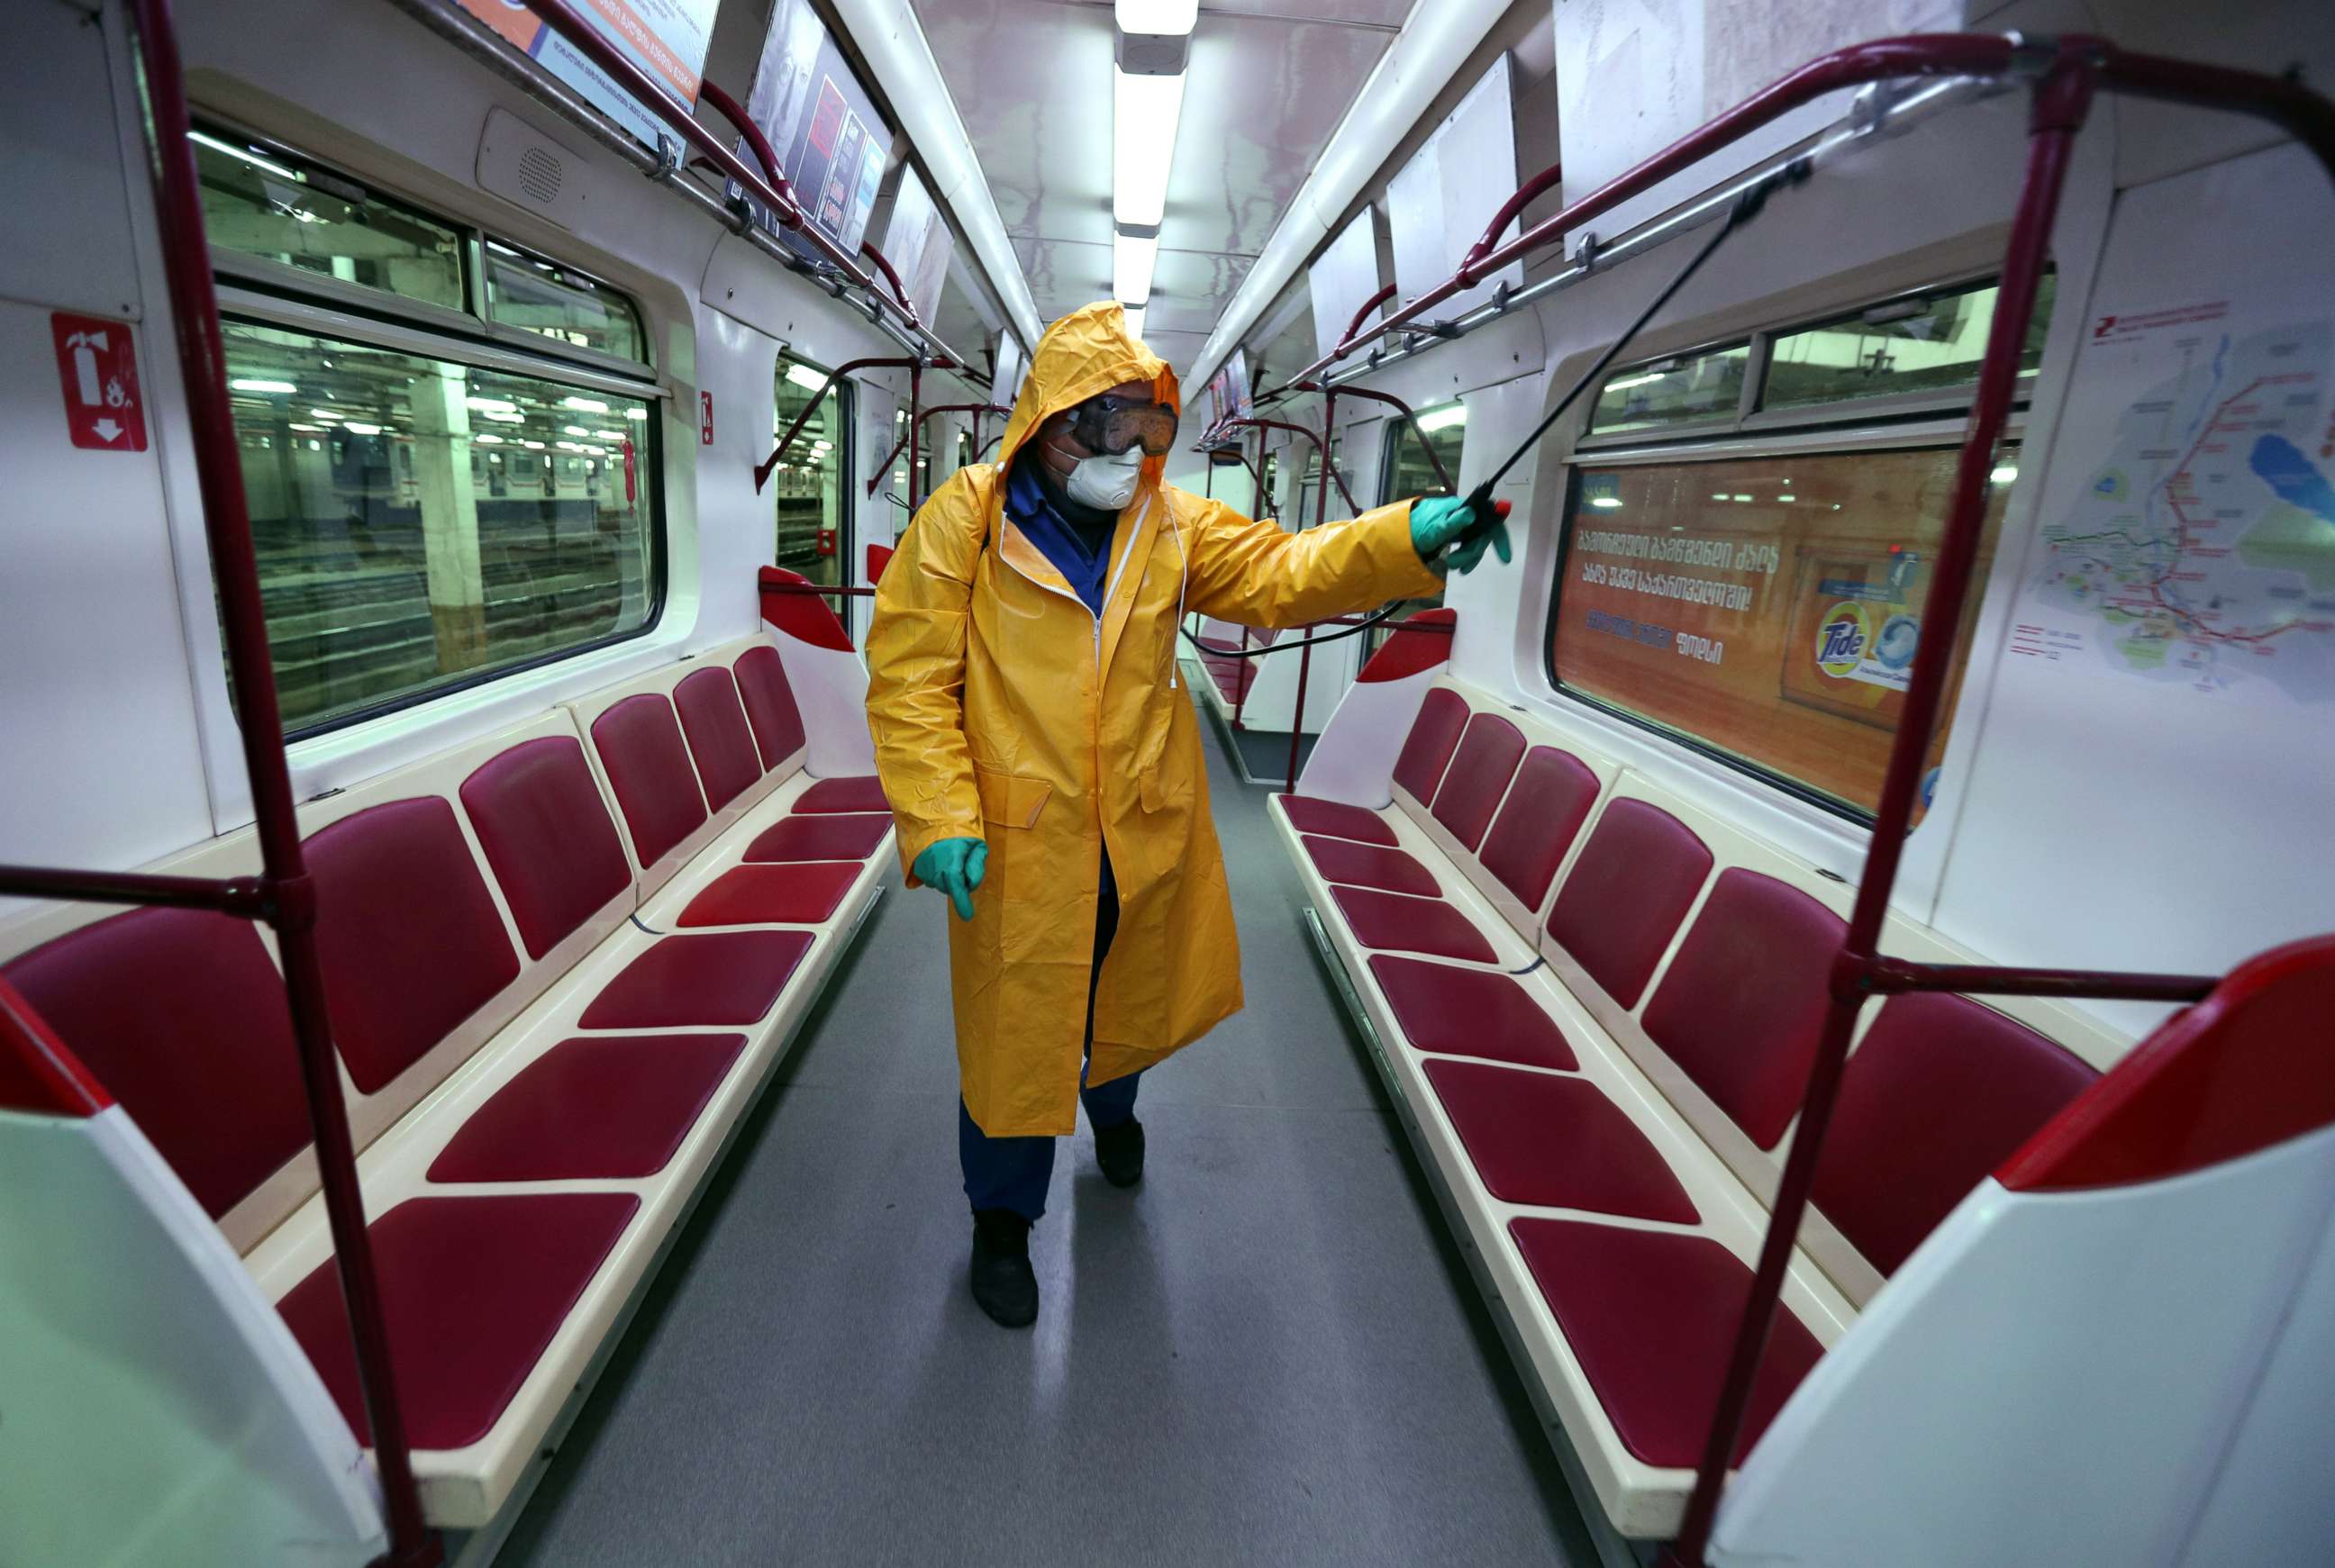 PHOTO: An employee wearing protective gear sprays disinfectant to sanitize a tube train over coronavirus fears in Tbilisi, Georgia, March 2, 2020.